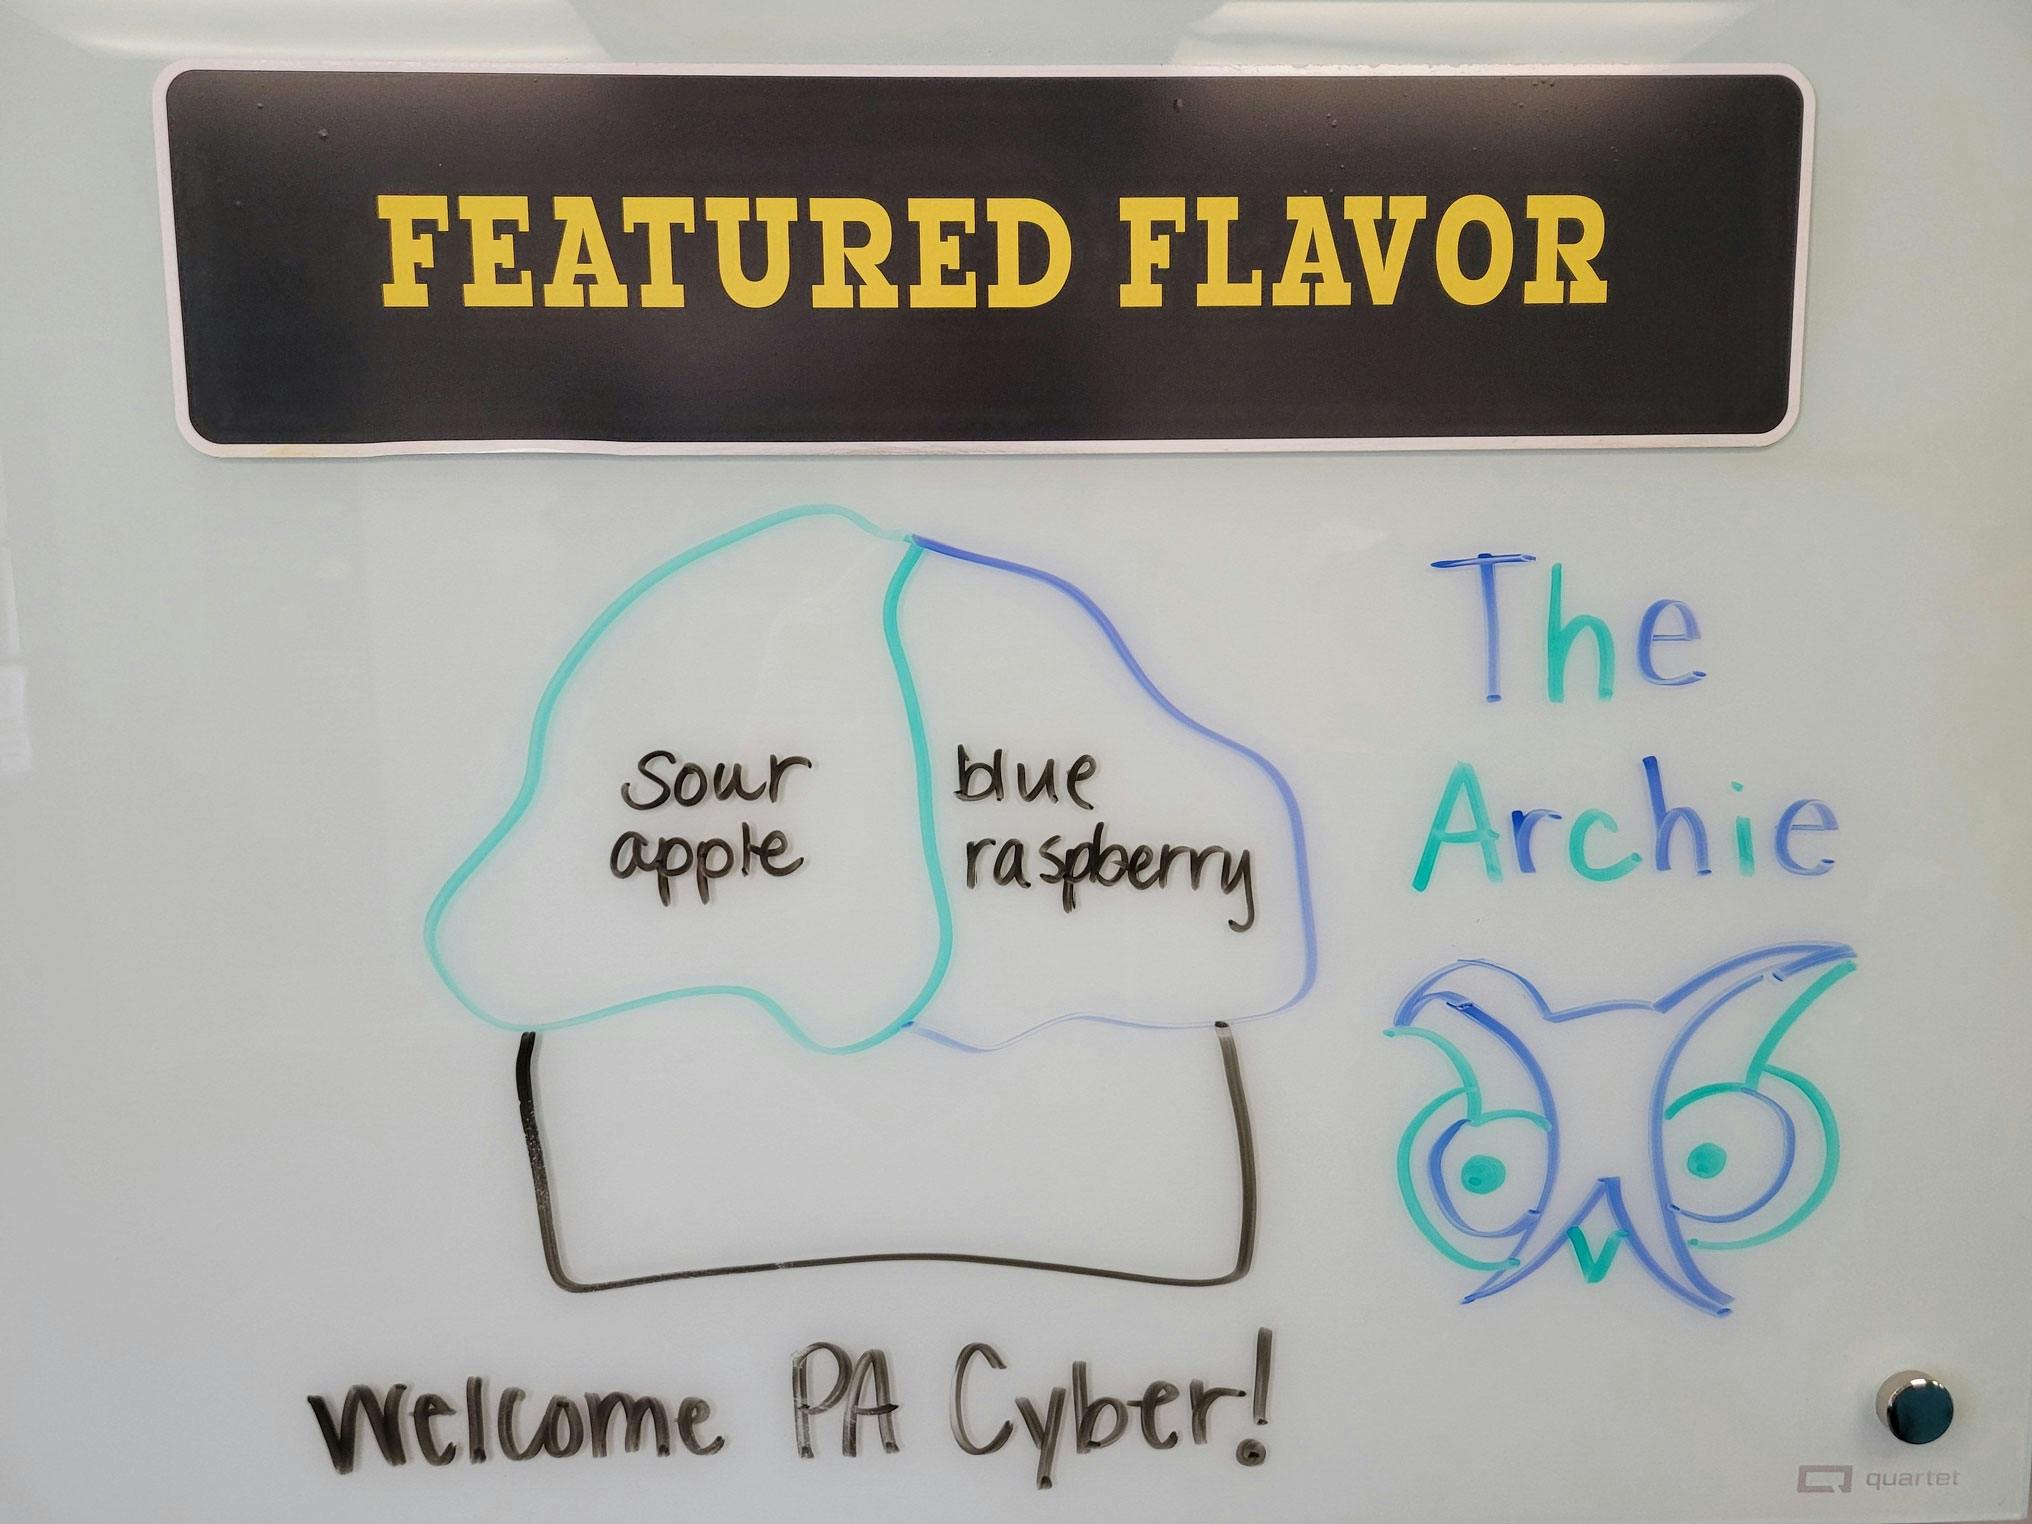 Drawing of The Archie featured flavor on a dry erase board.